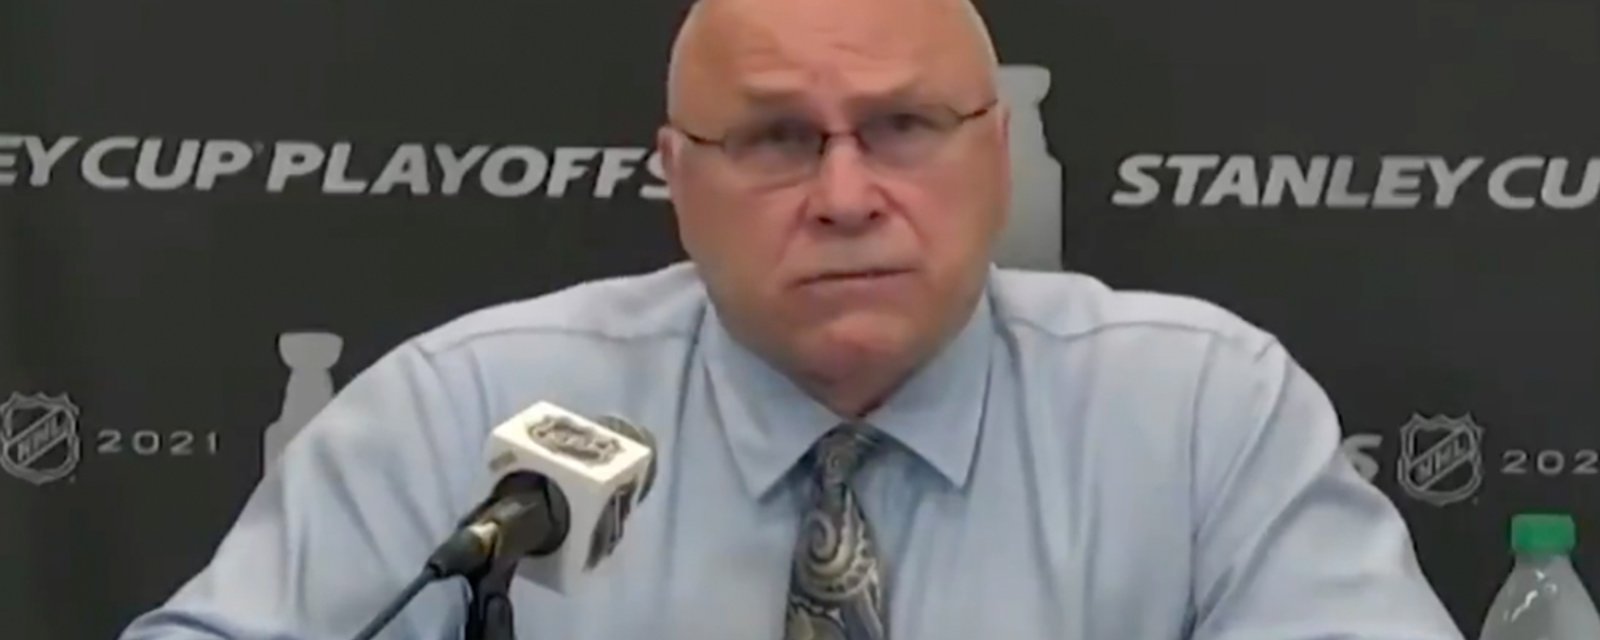 Barry Trotz fires back at Bruce Cassidy and his claim that the Islanders get special treatment